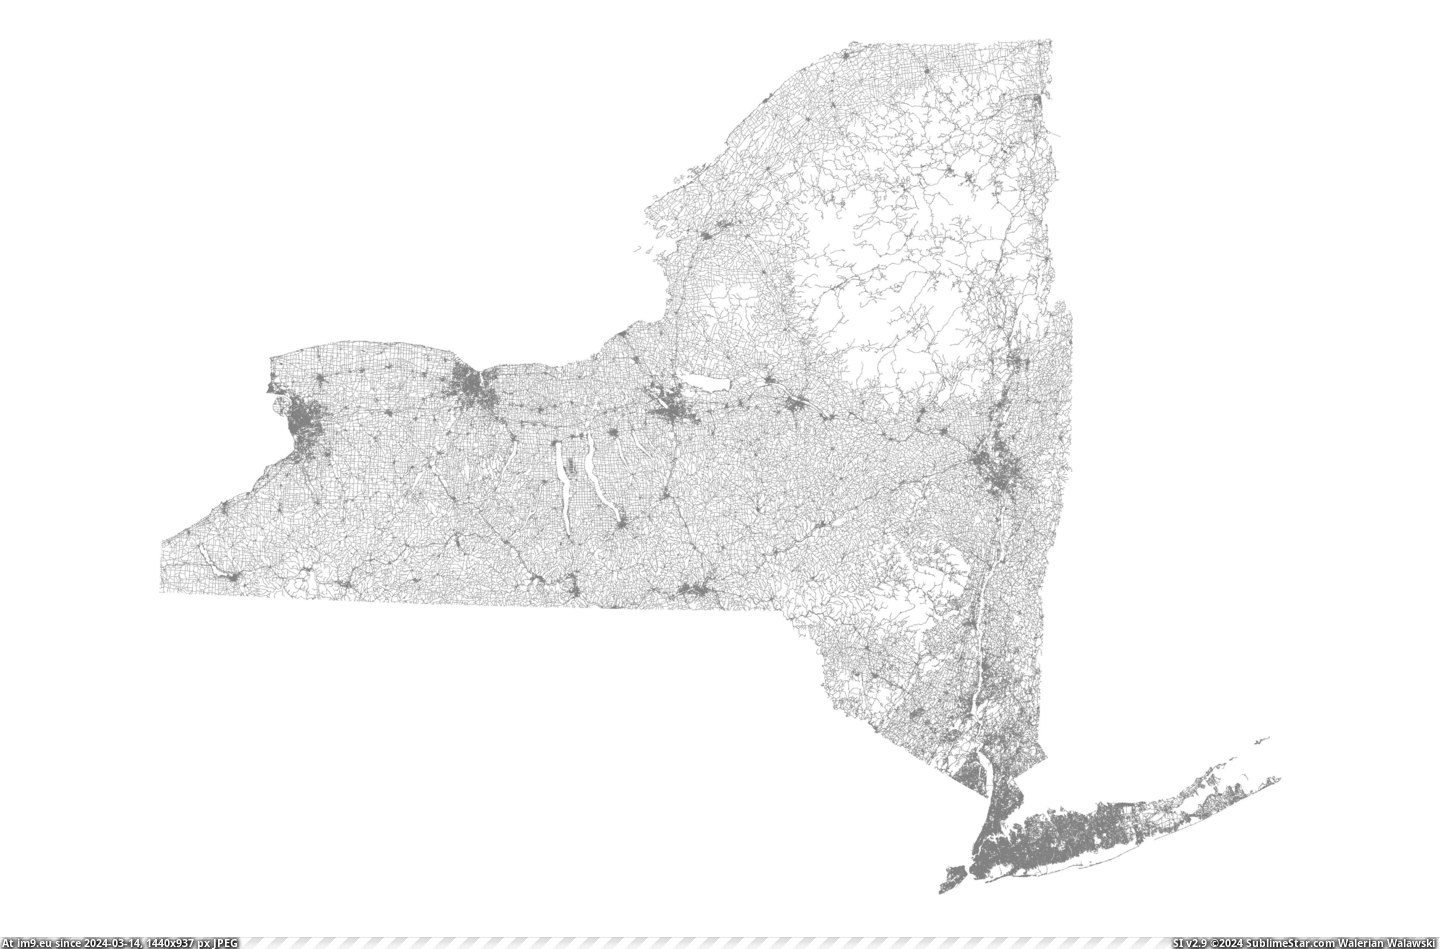 #York  #Roads [Mapporn] All roads in New York, nothing more [OS] [4417x2887] Pic. (Image of album My r/MAPS favs))